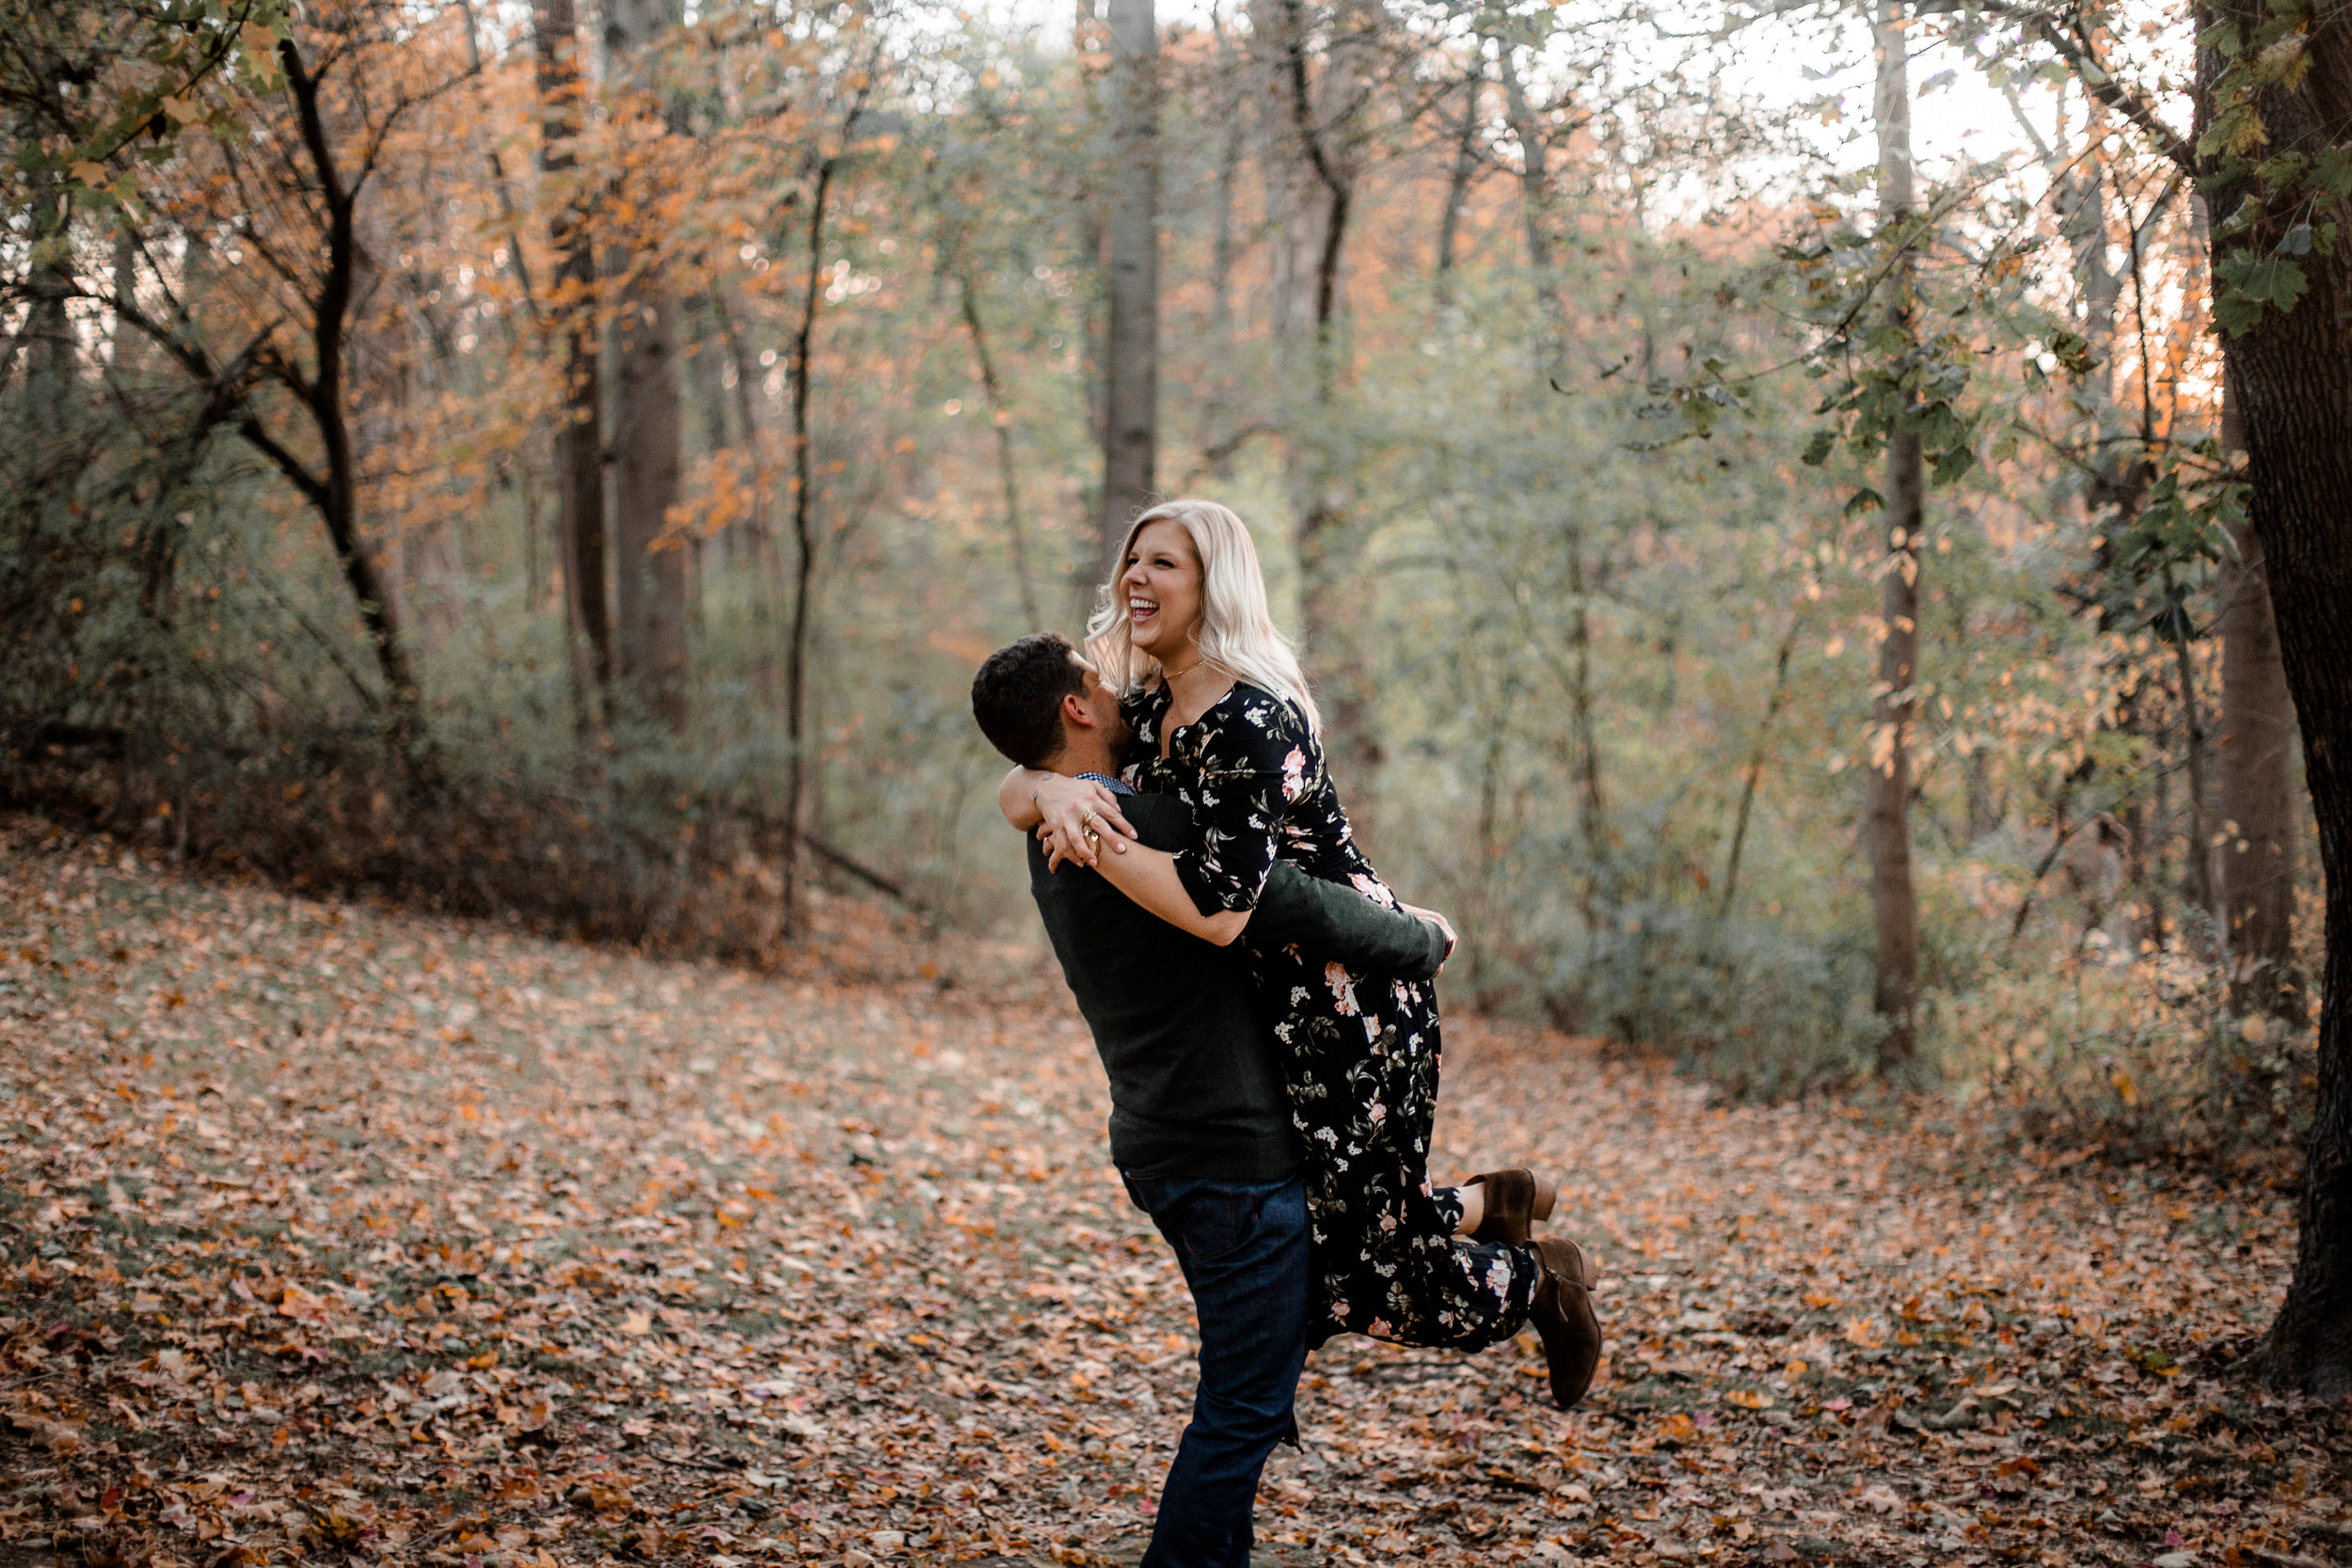 nicole-daacke-photography-carefree-bohemian-lancaster-pa-pennsylvania-engagement-photos-engagement-session-golden-sunset-adventure-session-in-lancaster-pa-lancaster-pa-outdoor-wedding-photographer-46.jpg